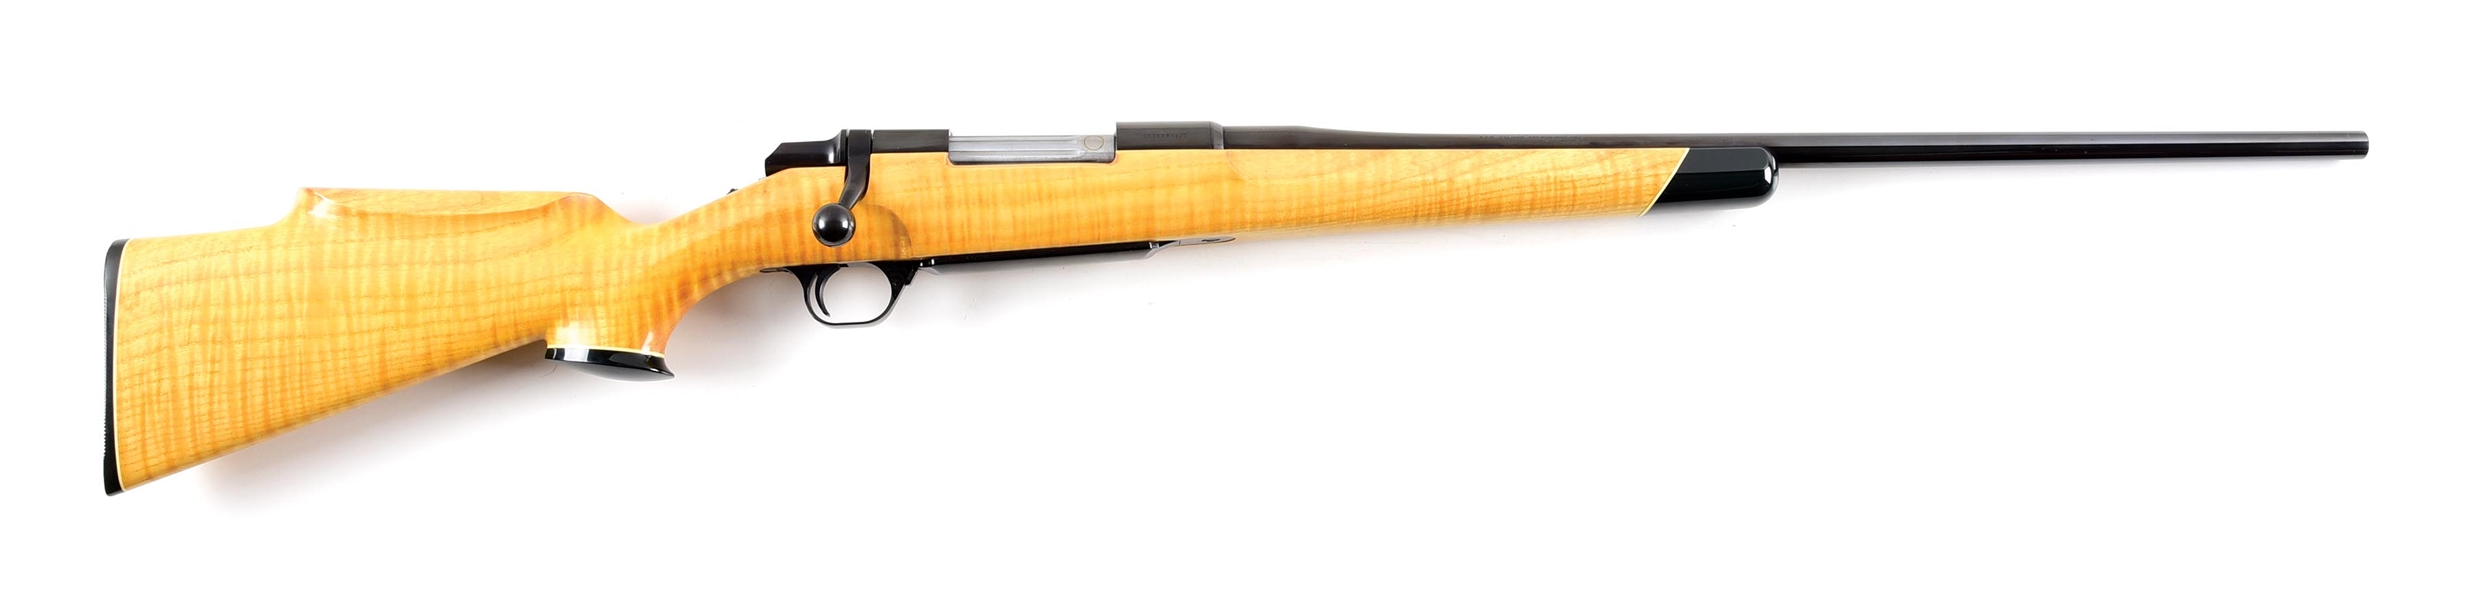 (M) BROWNING BBR BOLT ACTION RIFLE WITH ASH FRAXINUS AMERICA STOCK.